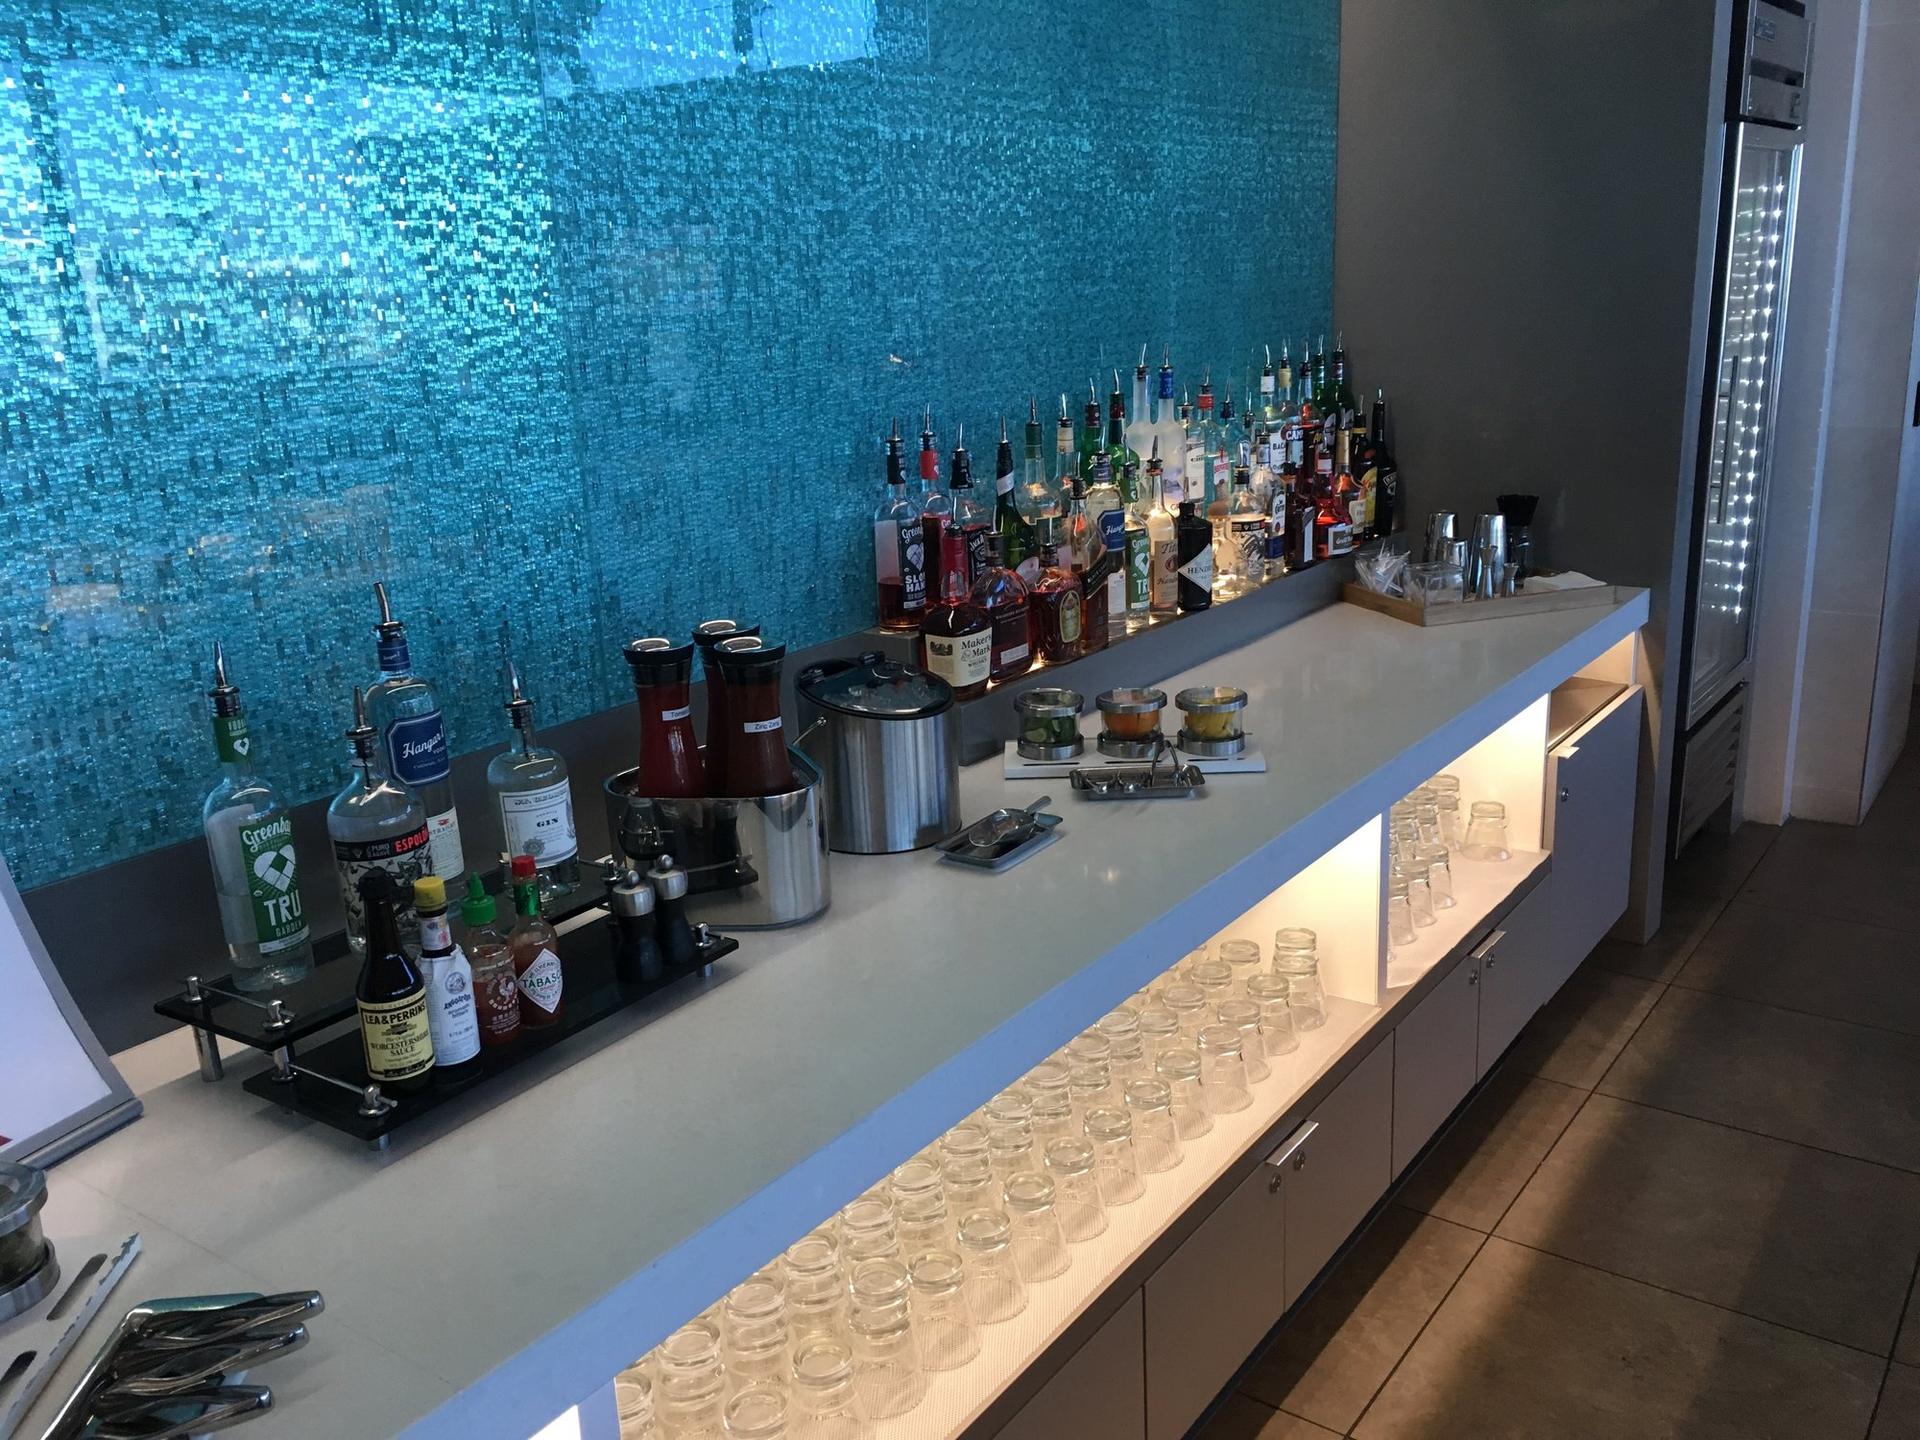 American Airlines Flagship Lounge image 14 of 65